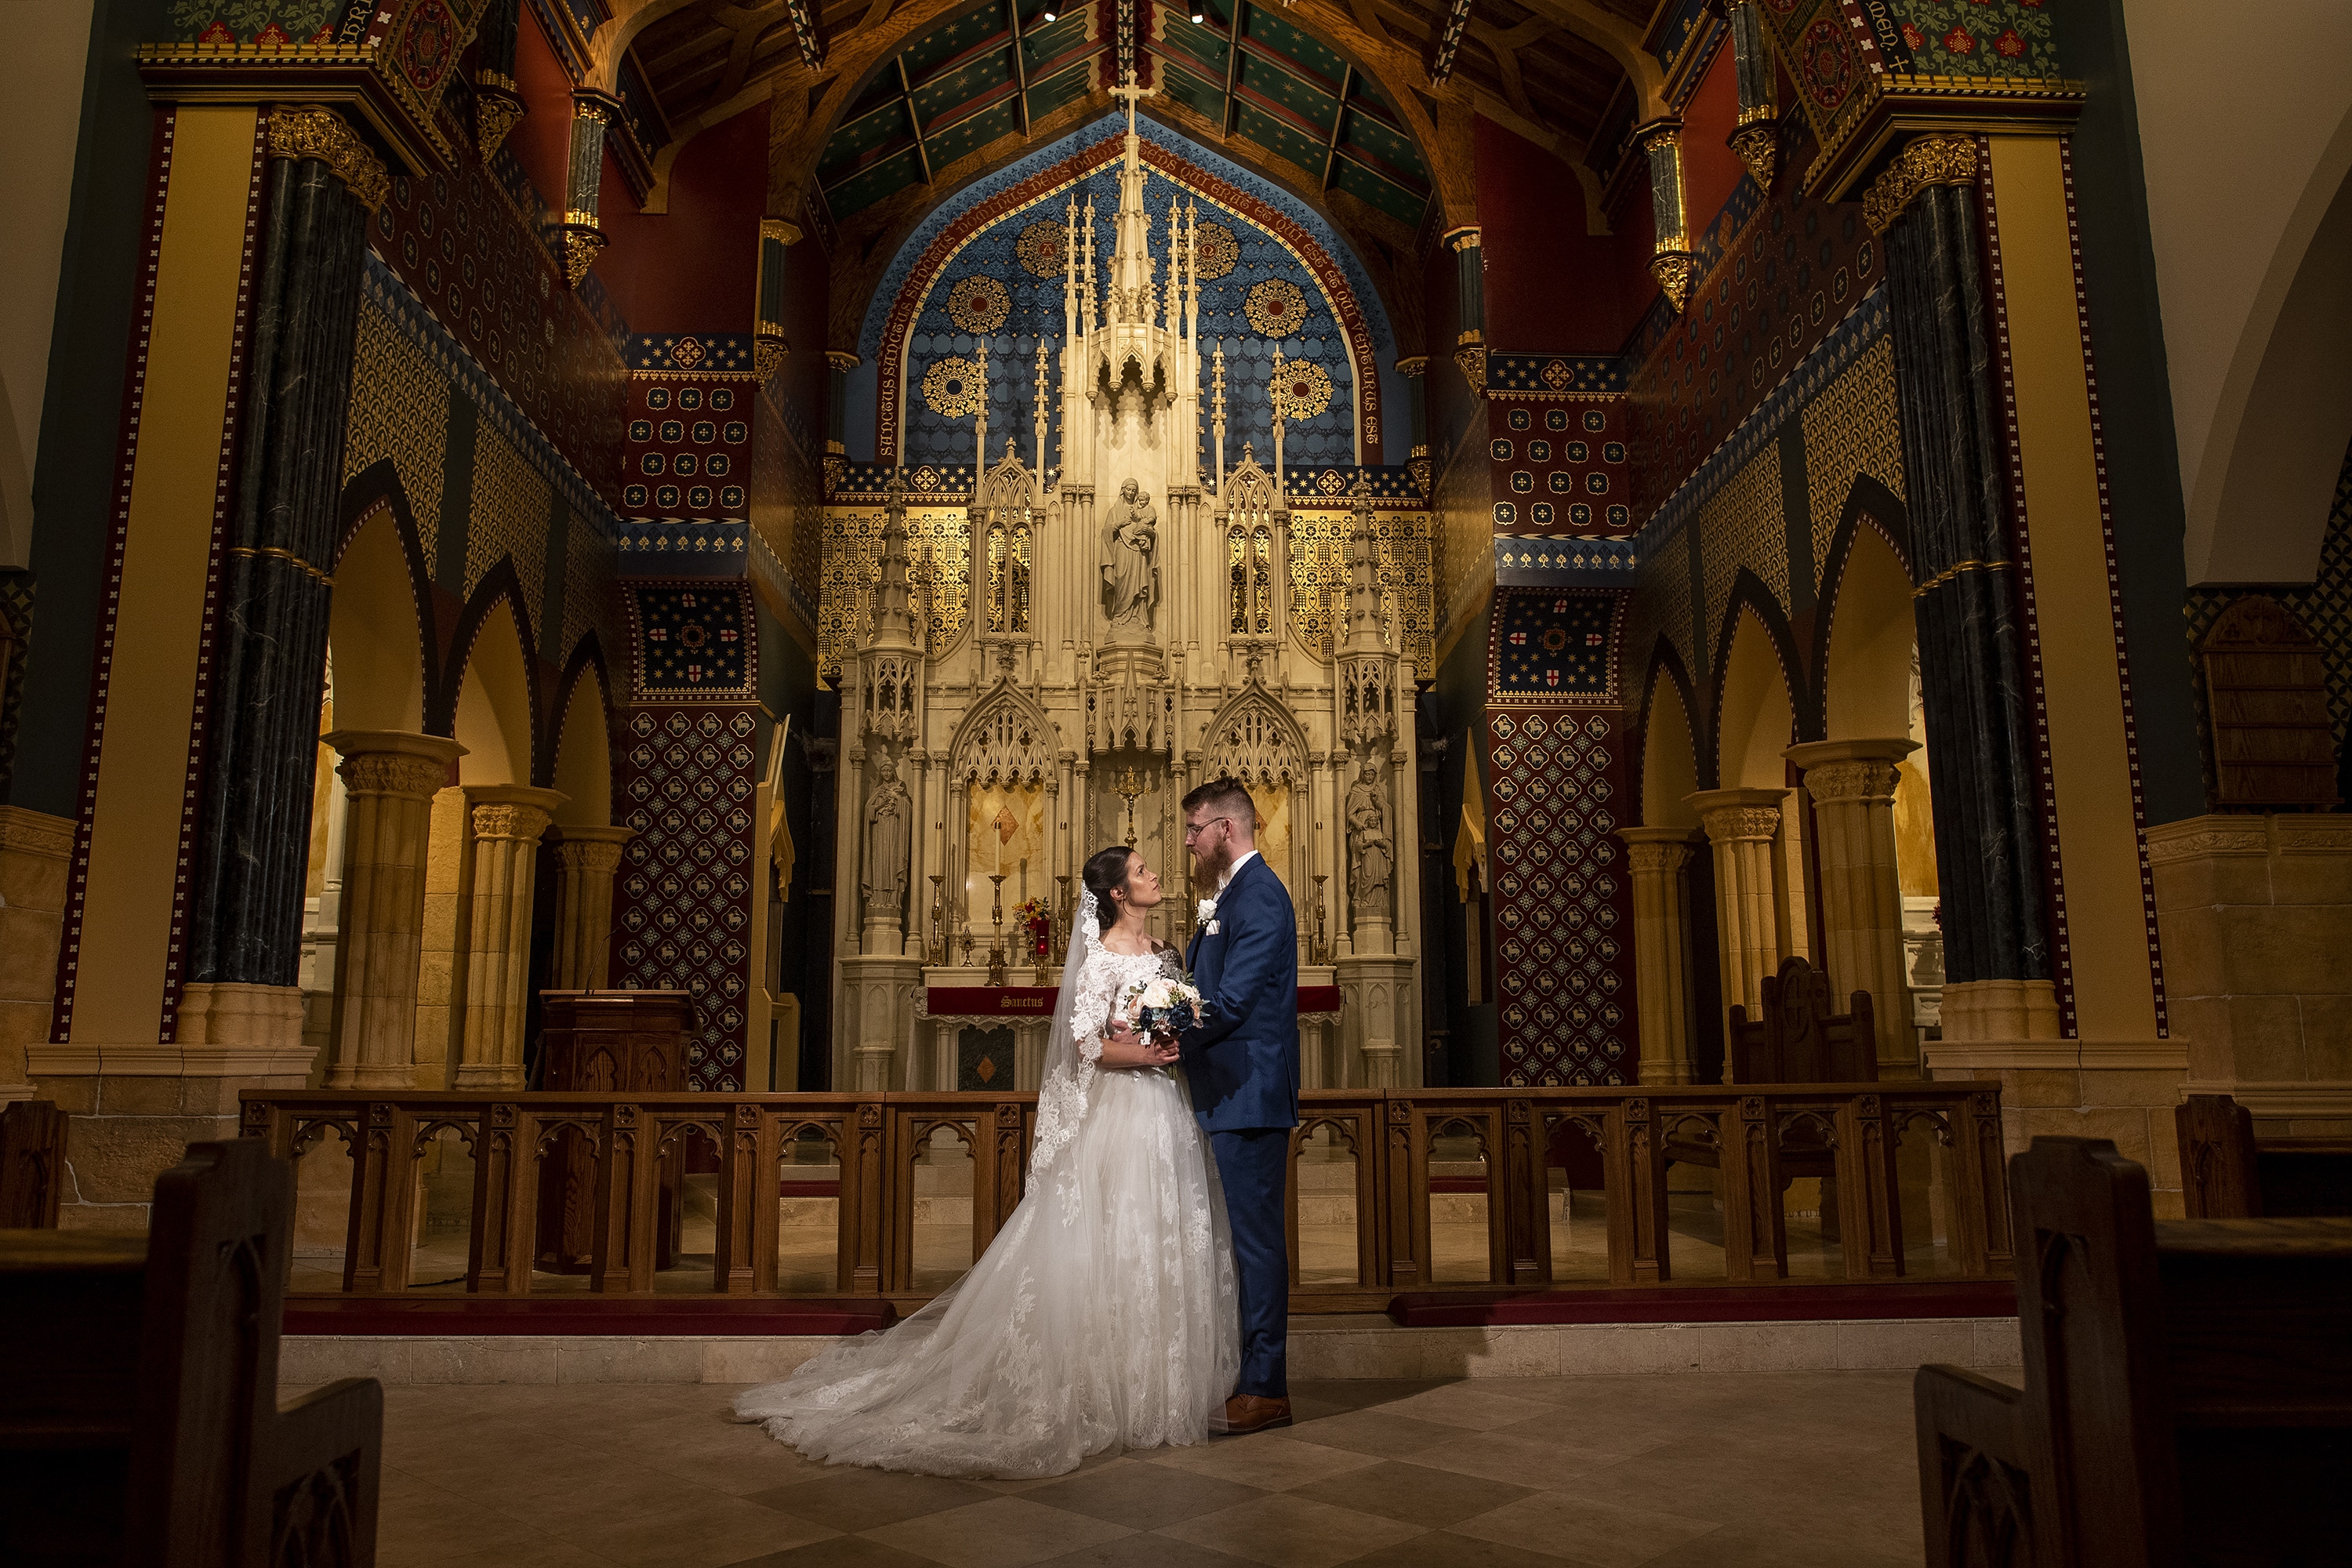 Bride and groom pose inside the church after a wedding at Our Lady of Mt. Carmel in Littleton, Colorado.